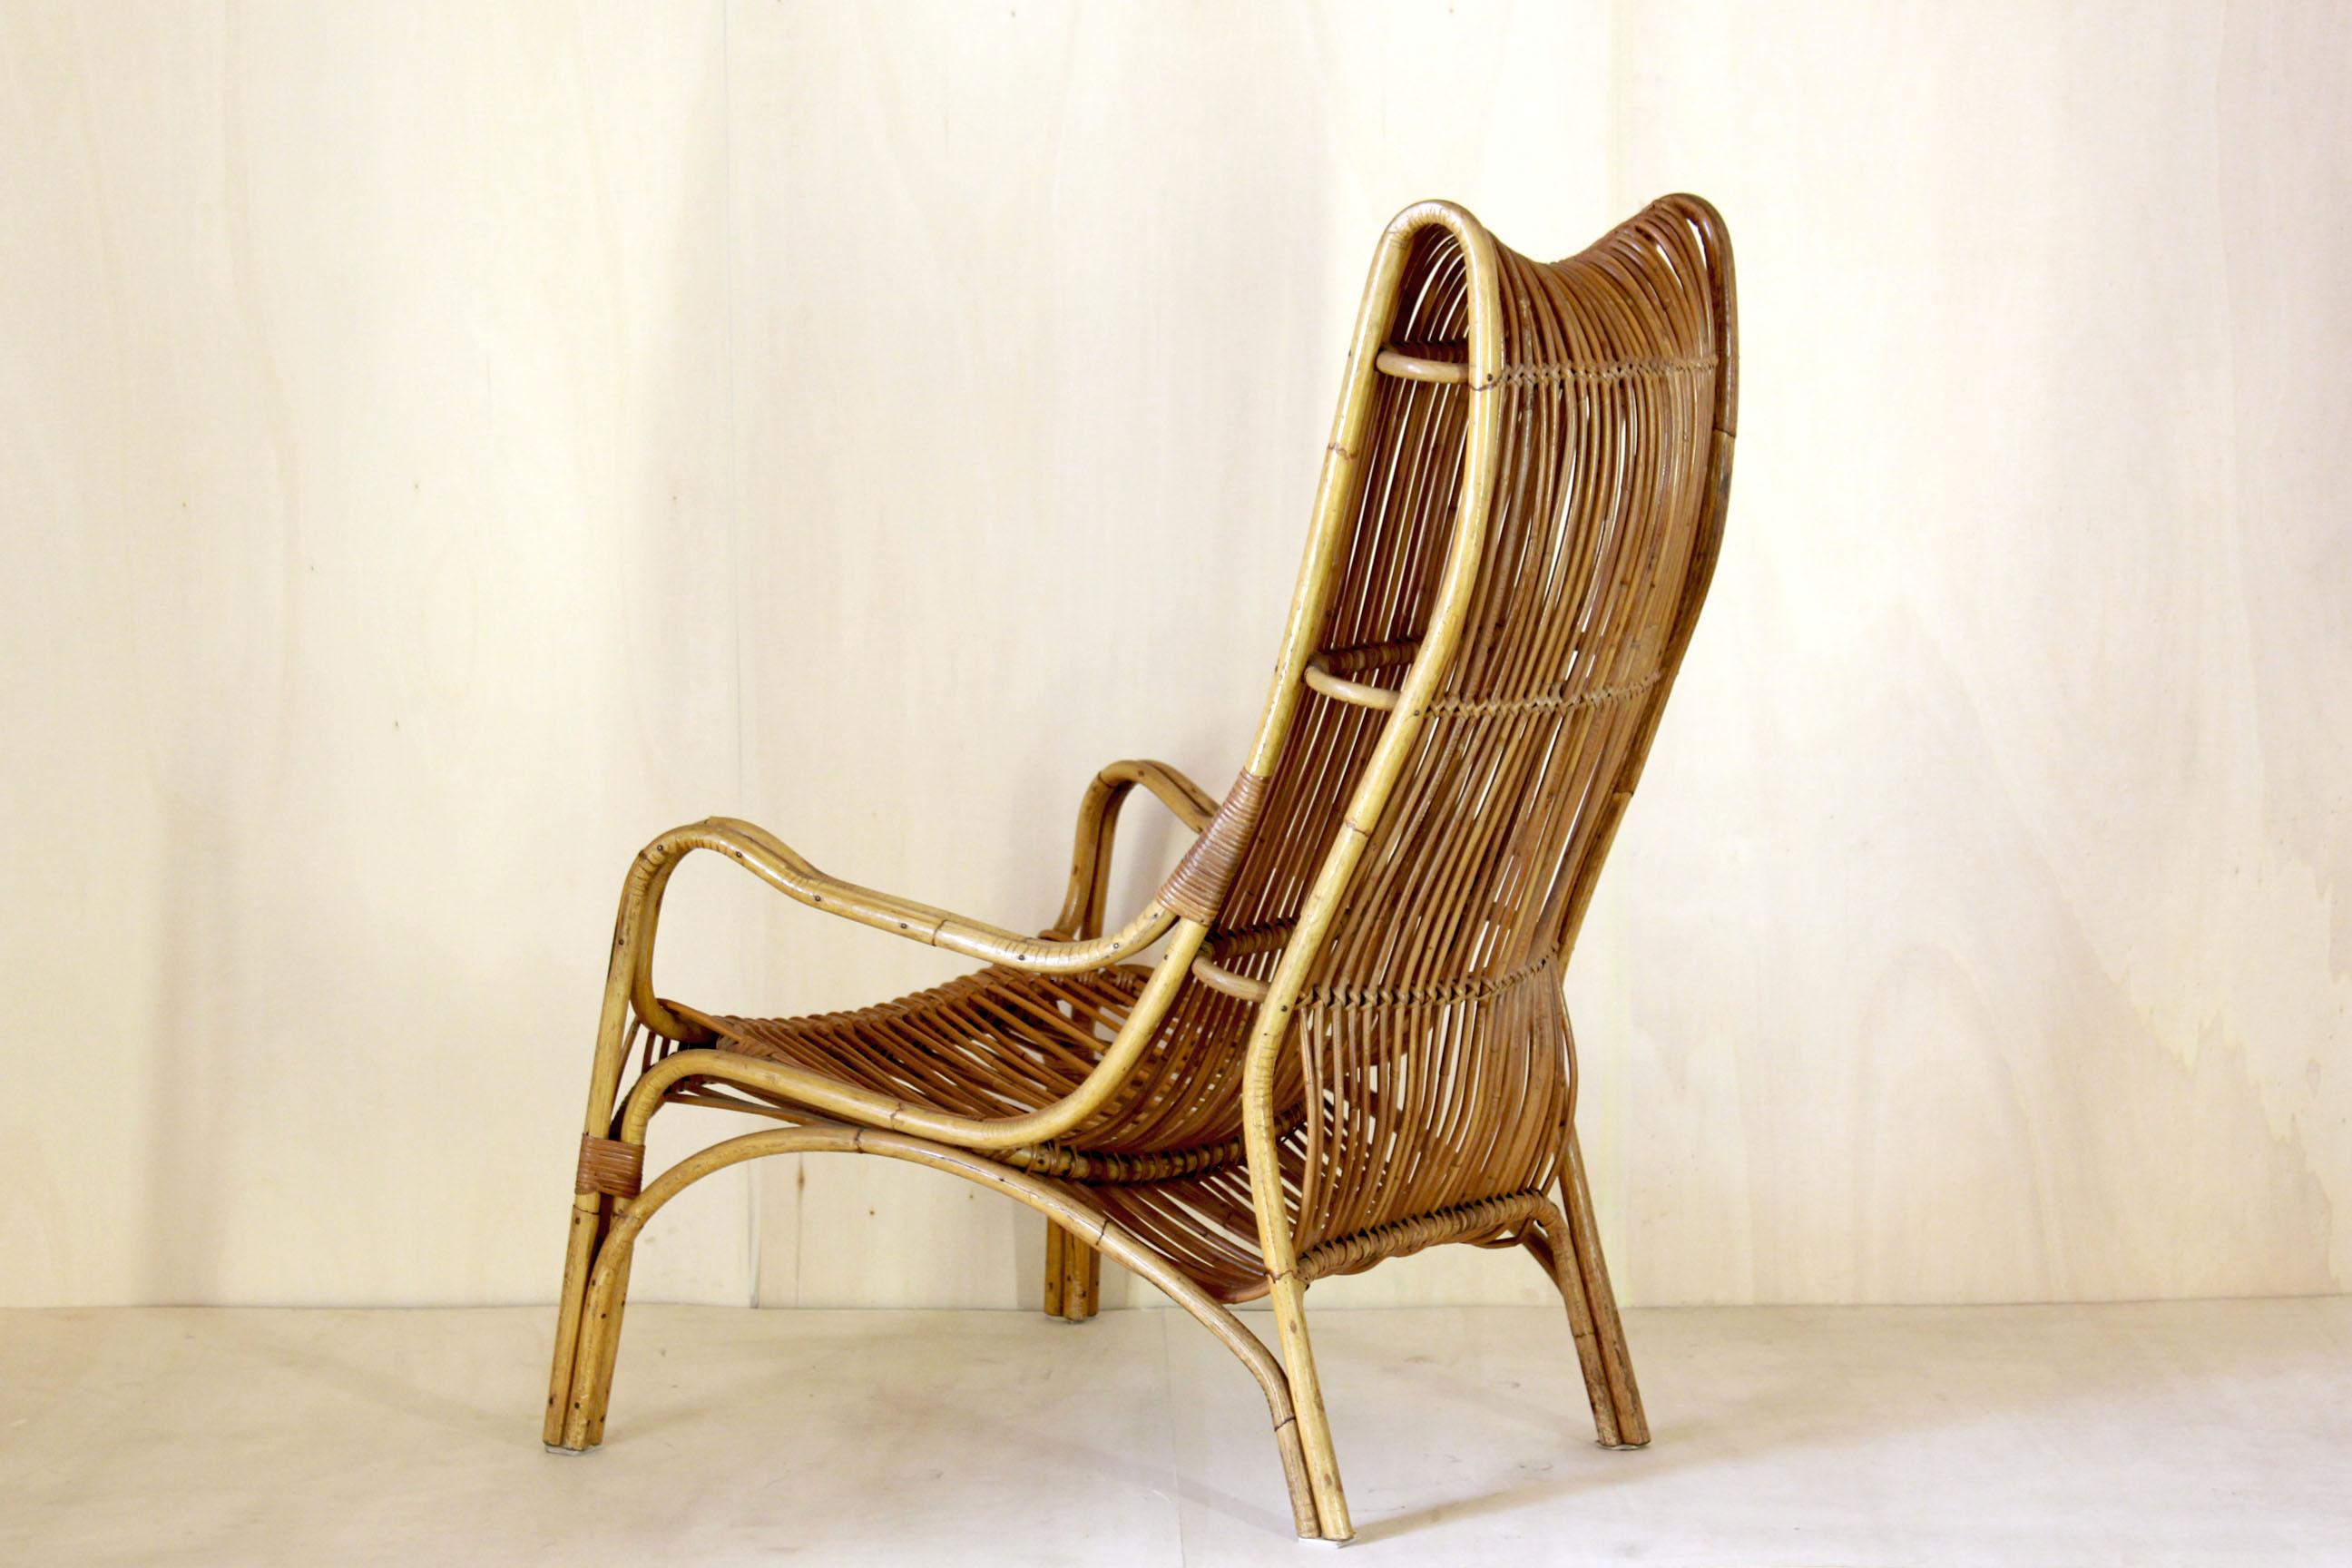 European Vintage armchair from the 1960s